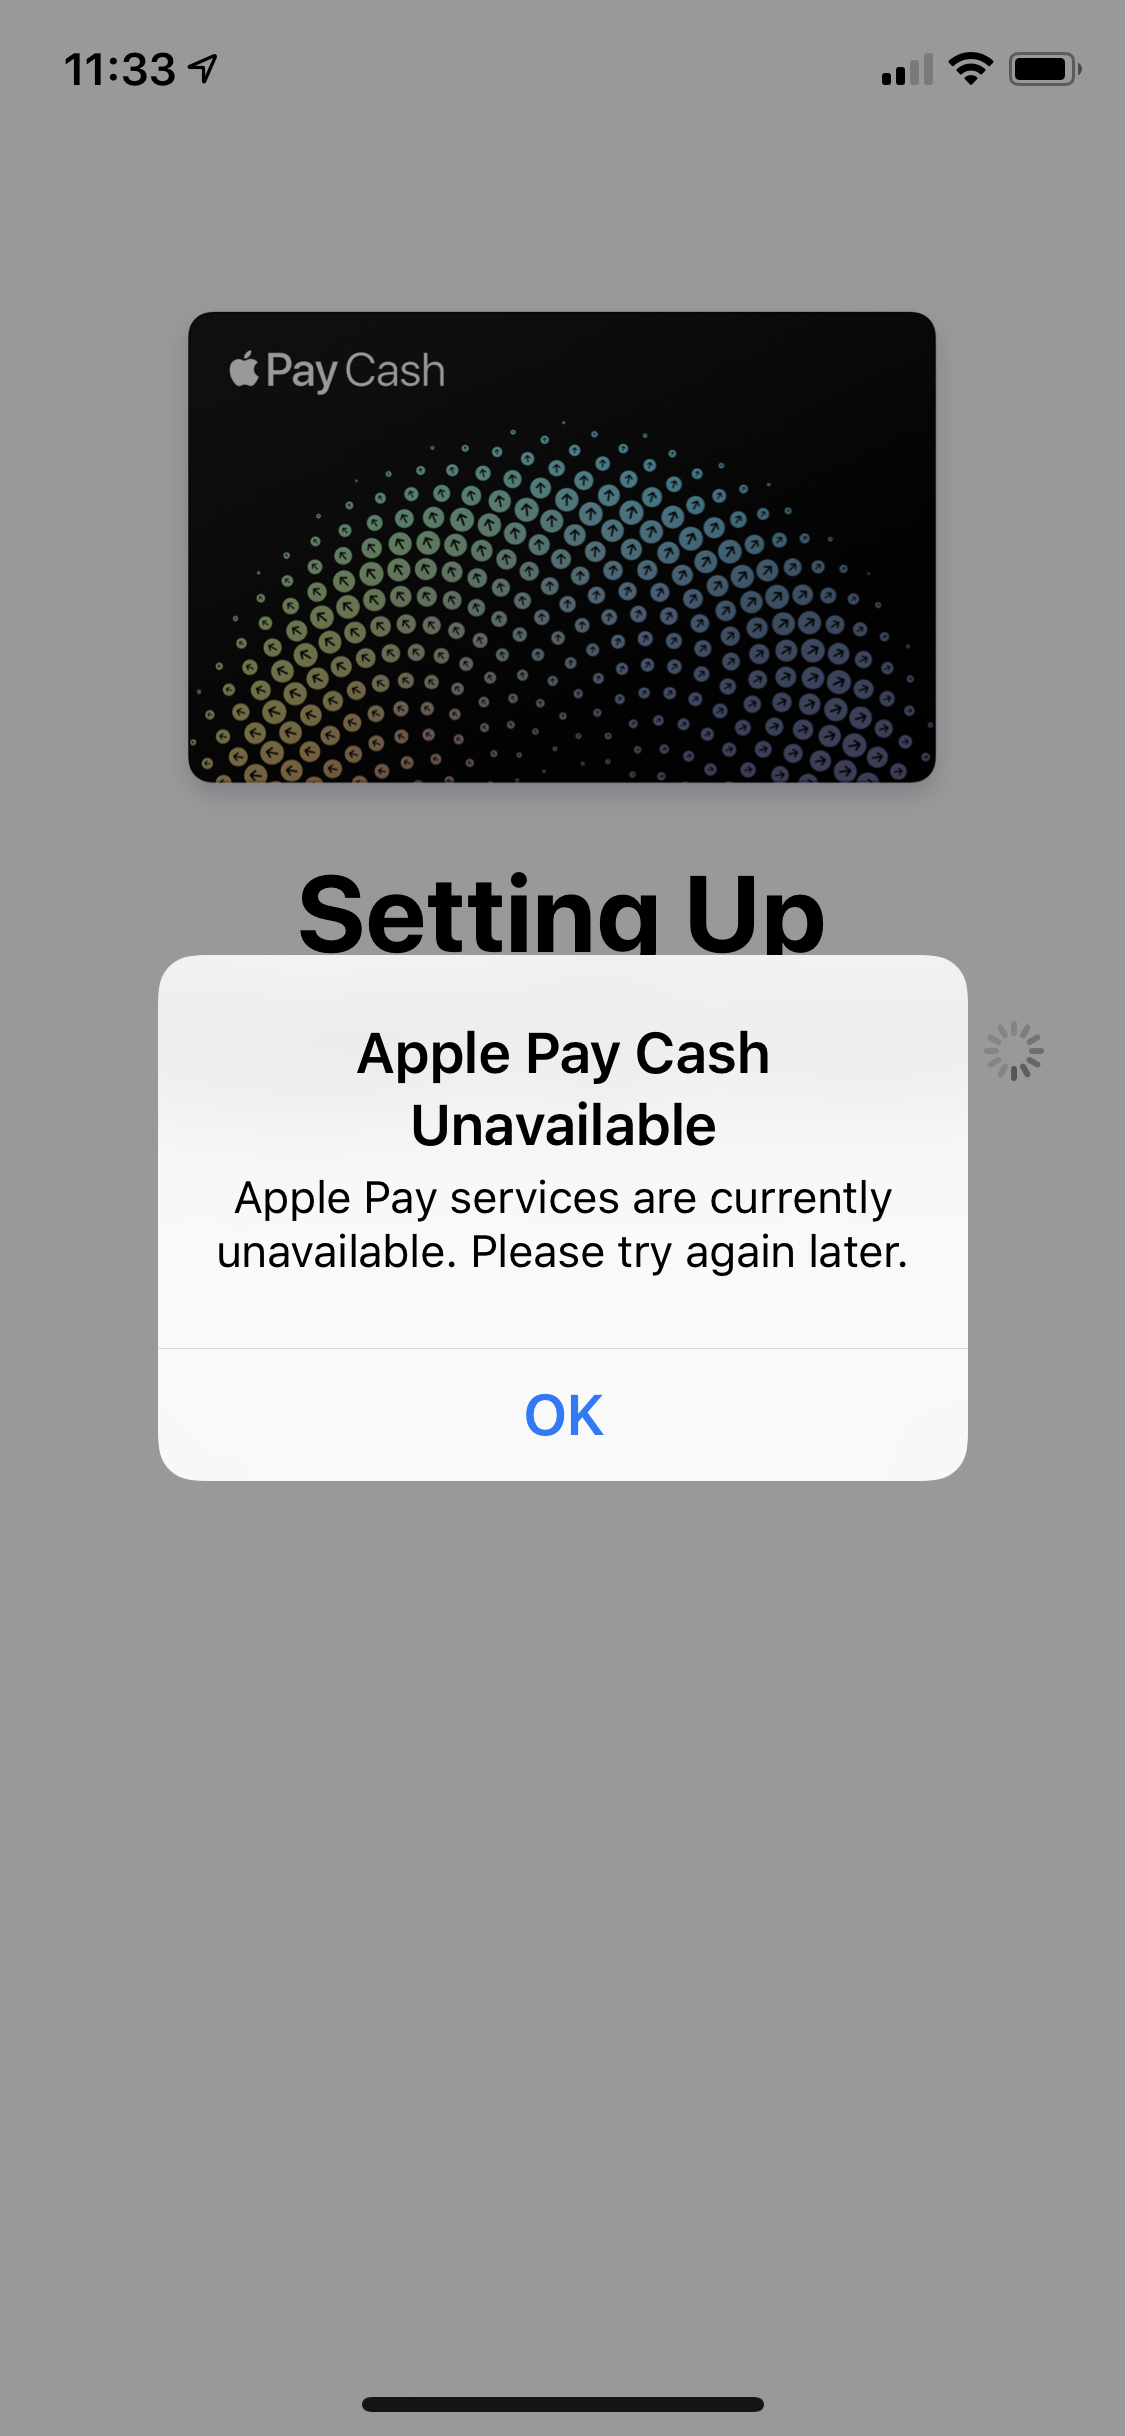 Apple Pay Services Unavailable? Apple Community